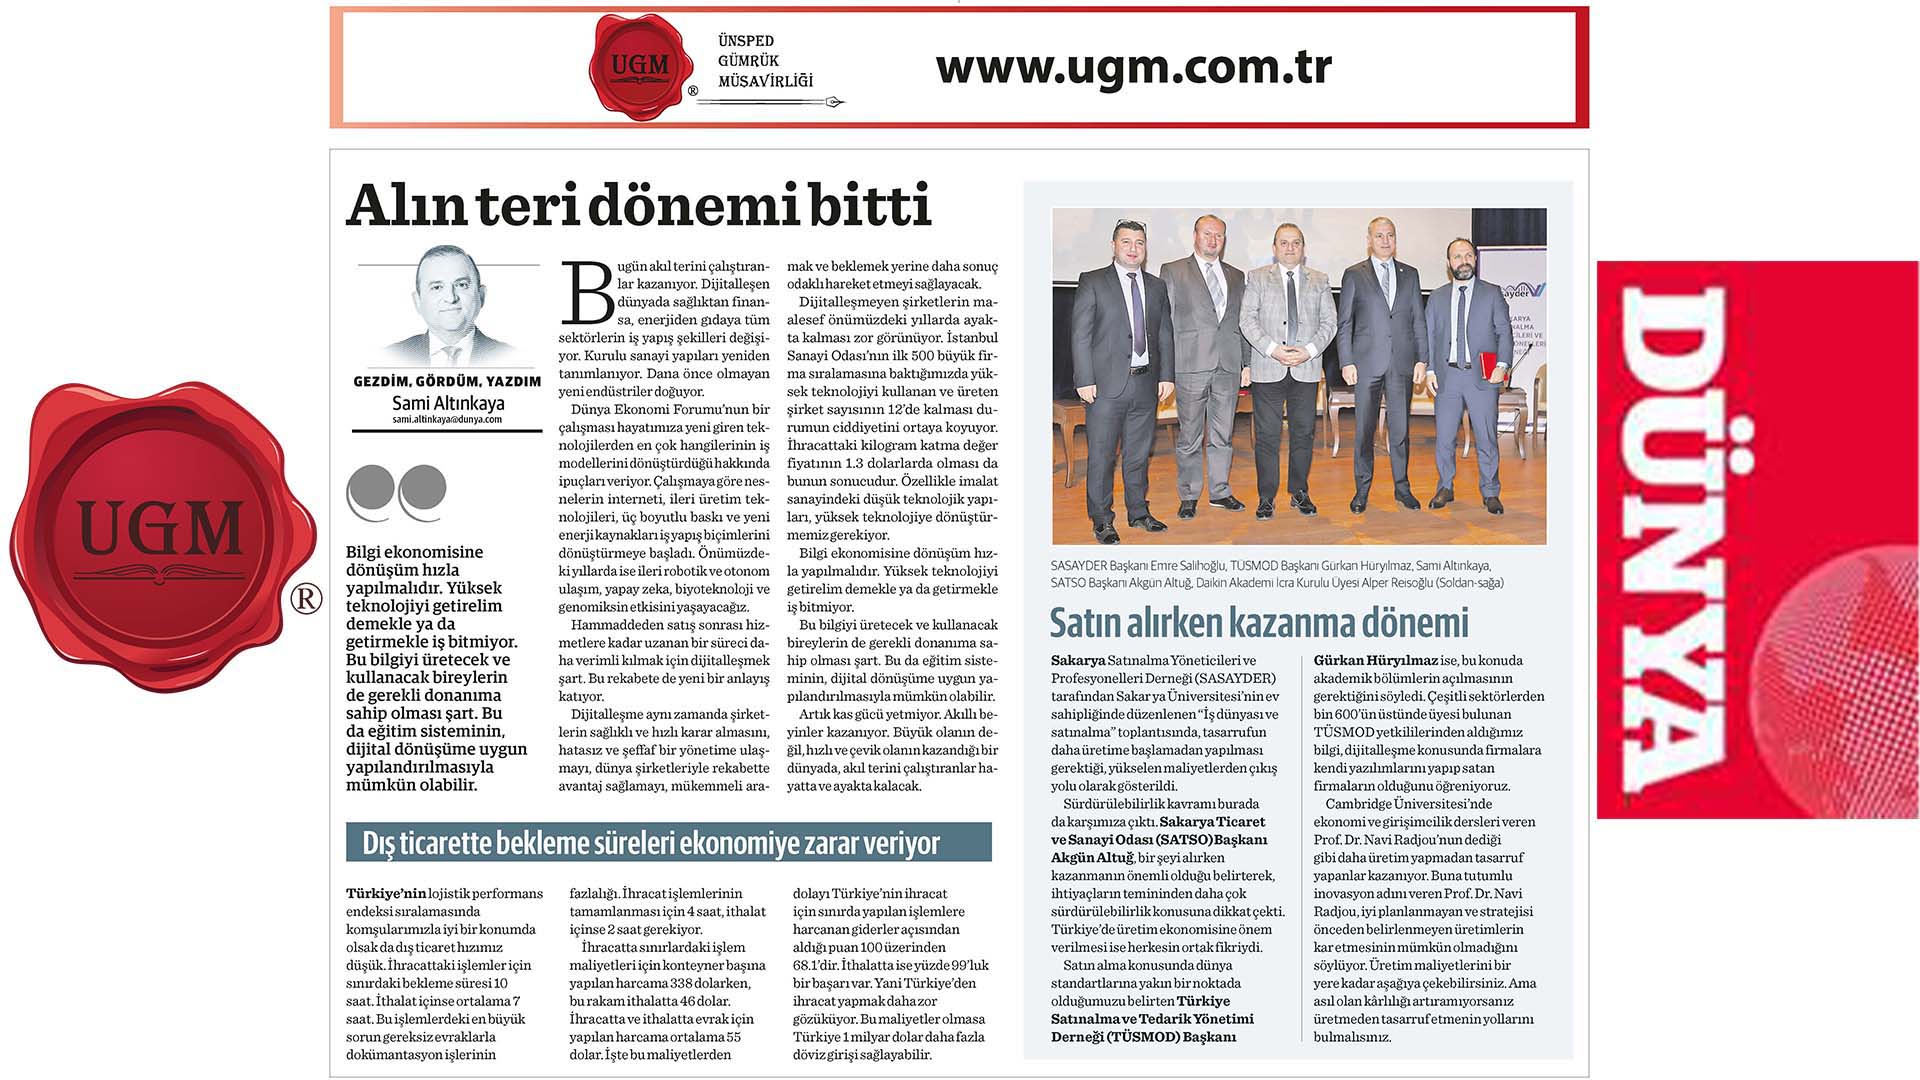 Article of our UGM Corporate Communications Director Mr. Sami Altınkaya entitled “Elbow grease” period is over published in the Dünya newspaper on 24.02.22020